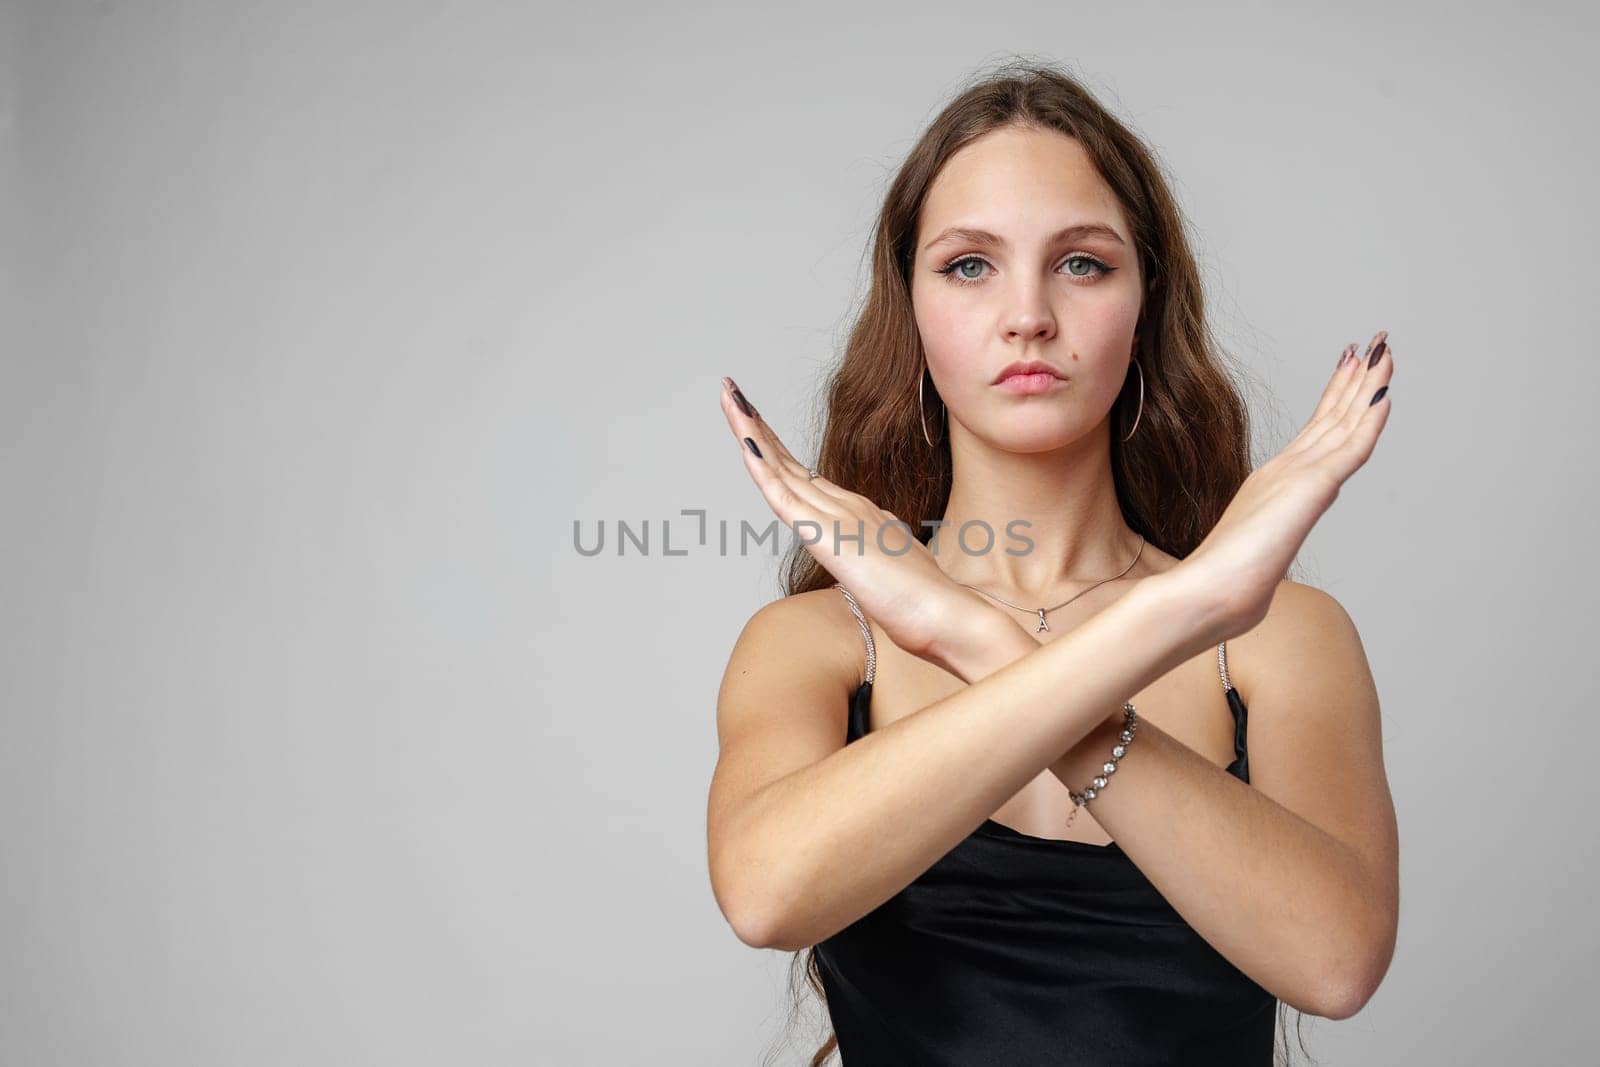 A young woman stands against a muted grey backdrop, her long, wavy hair falling gracefully over her shoulders. She wears a sleek, black sleeveless dress, complementing her fair complexion. With an intense gaze, she crosses her arms to form an X symbol in front of her, suggesting a sign of negation or denial.